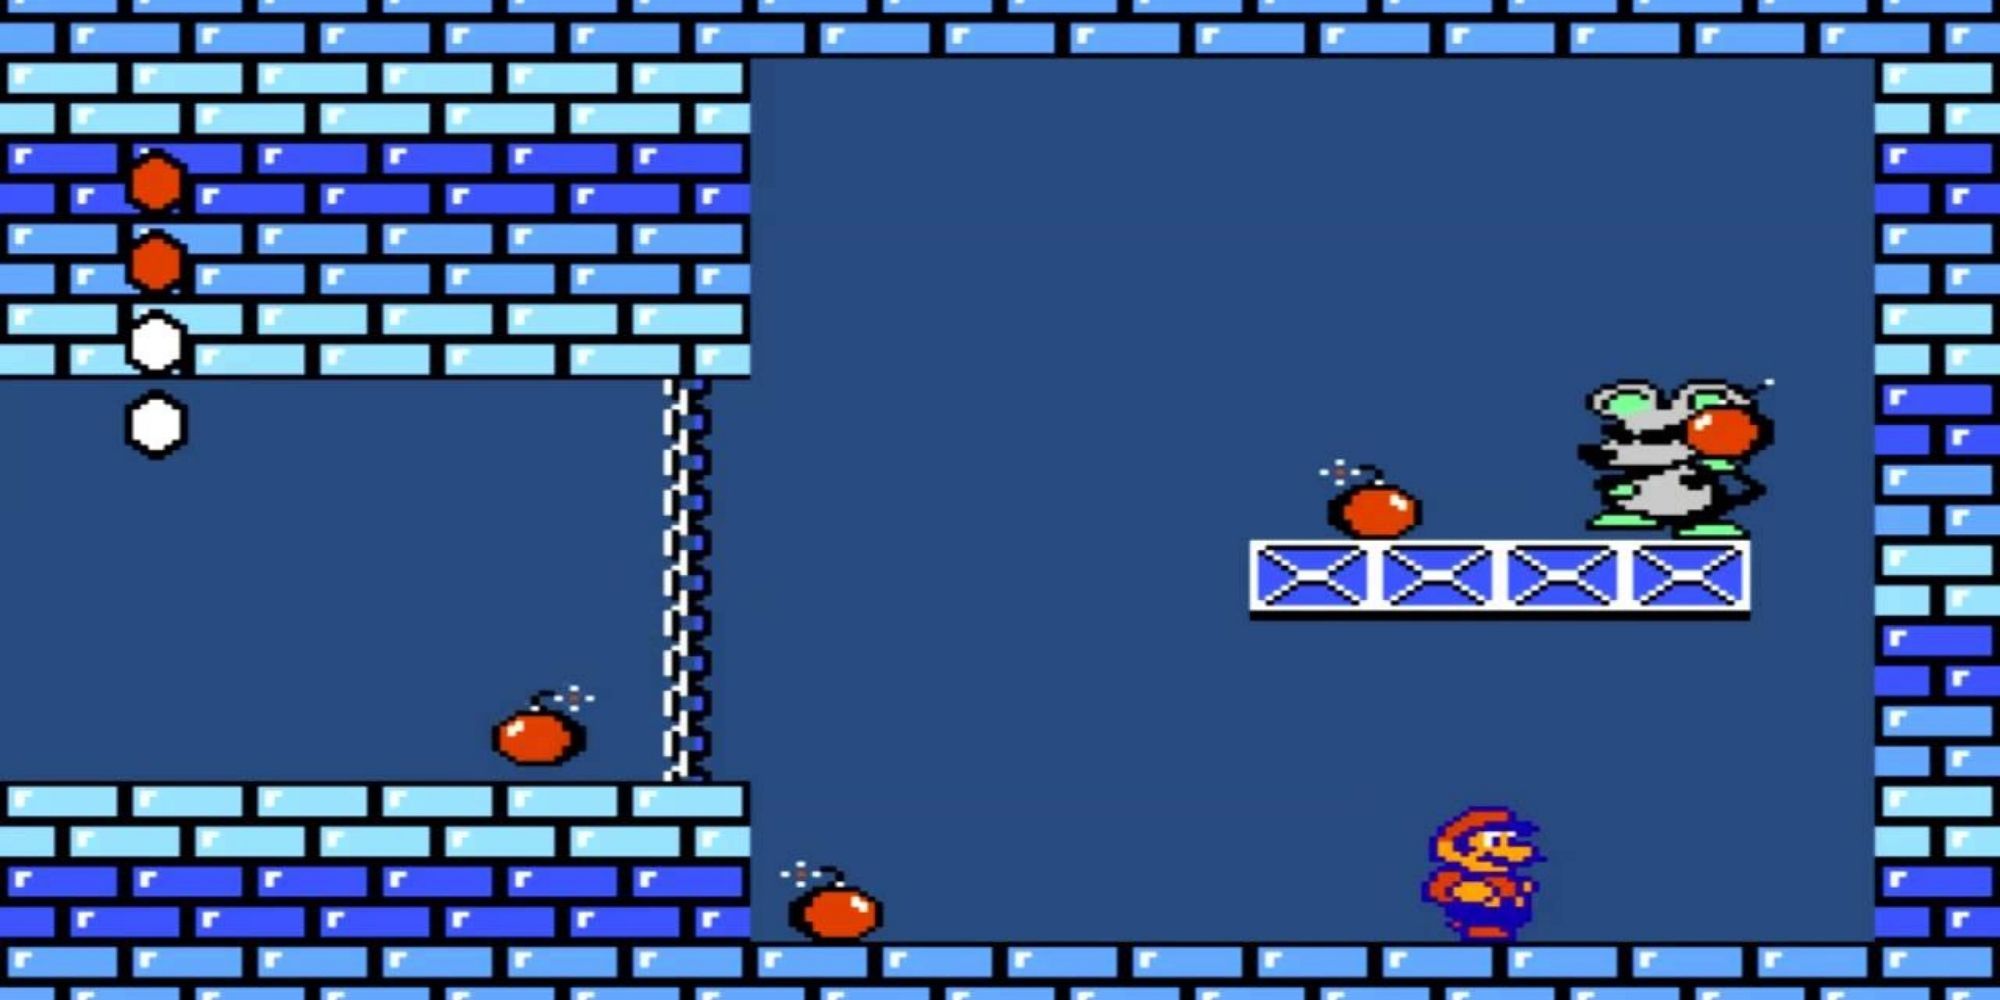 Super Mario Bros. 2 Mouser Attacks Mario With Bombs In A Blue Room